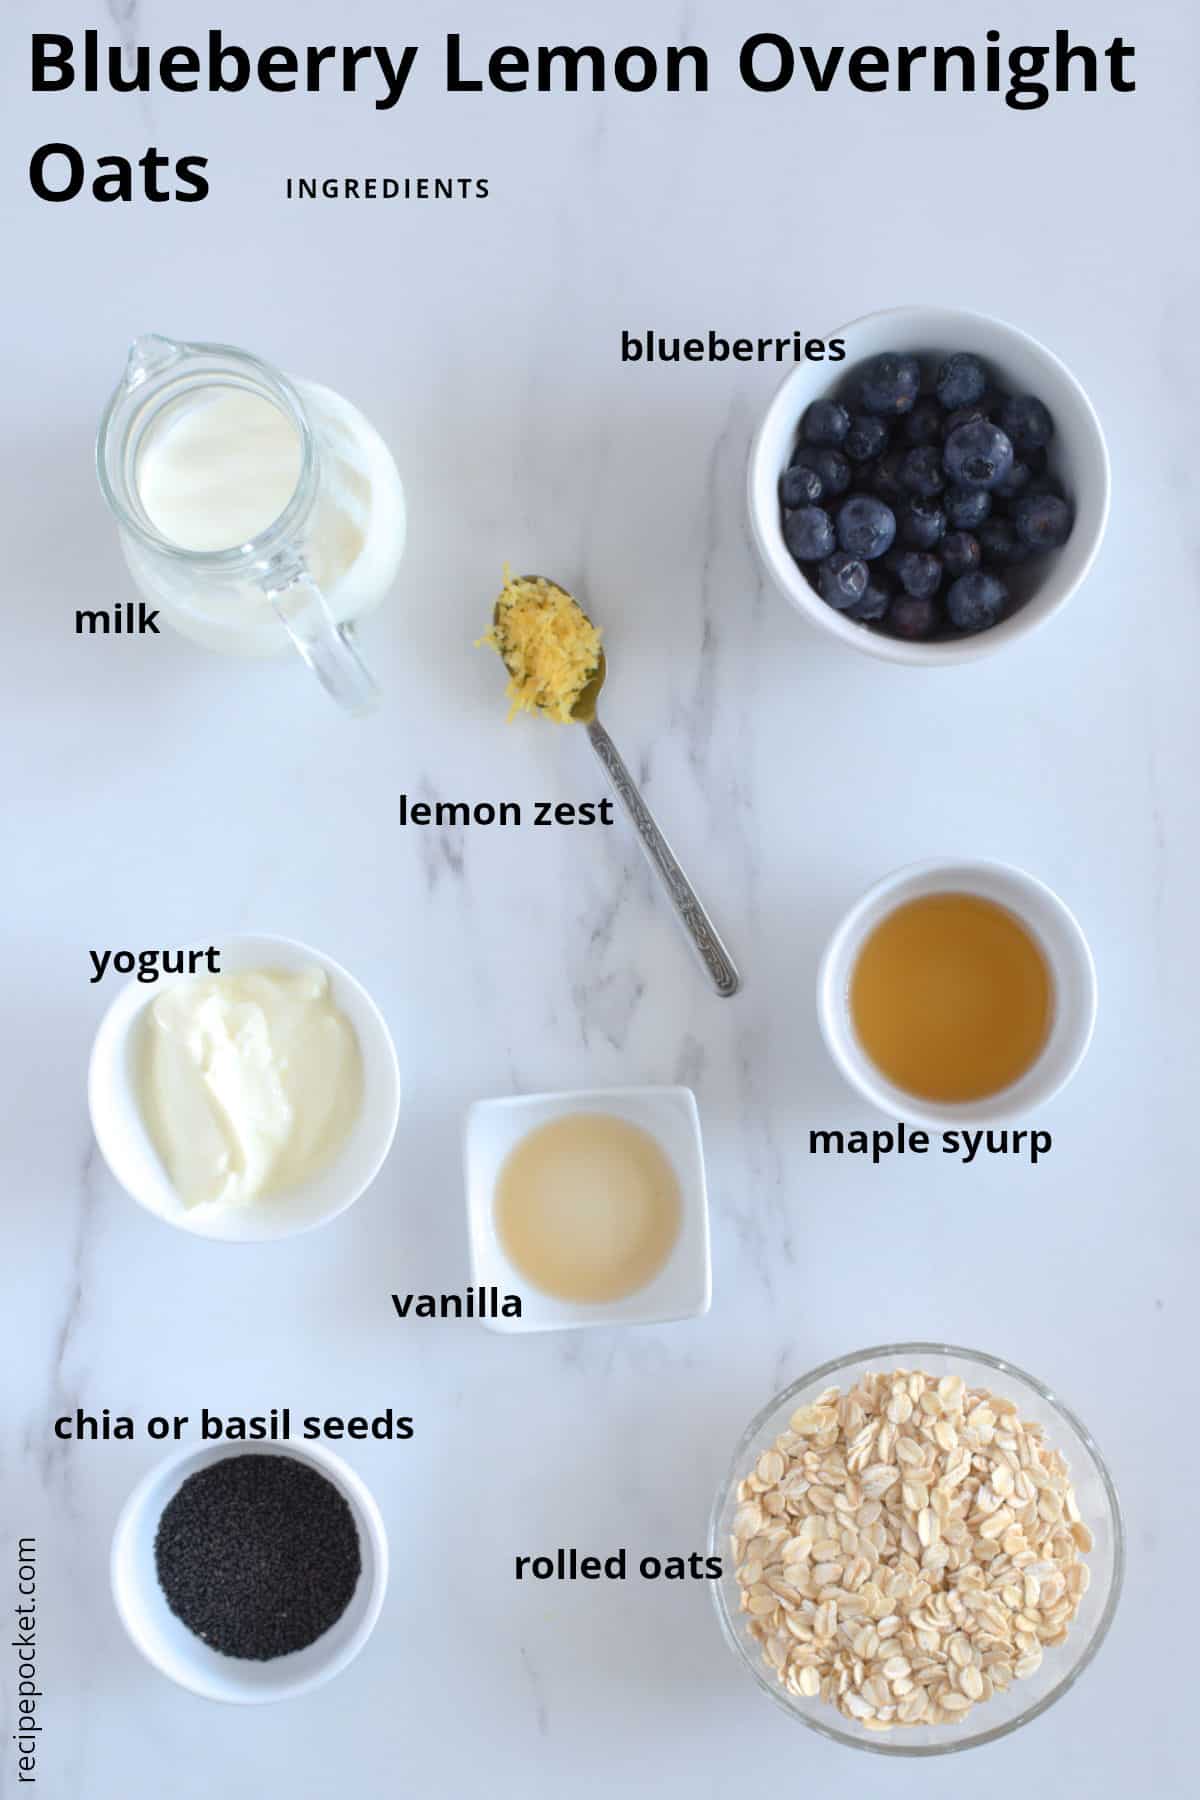 Image showing ingredients for overnight oats.